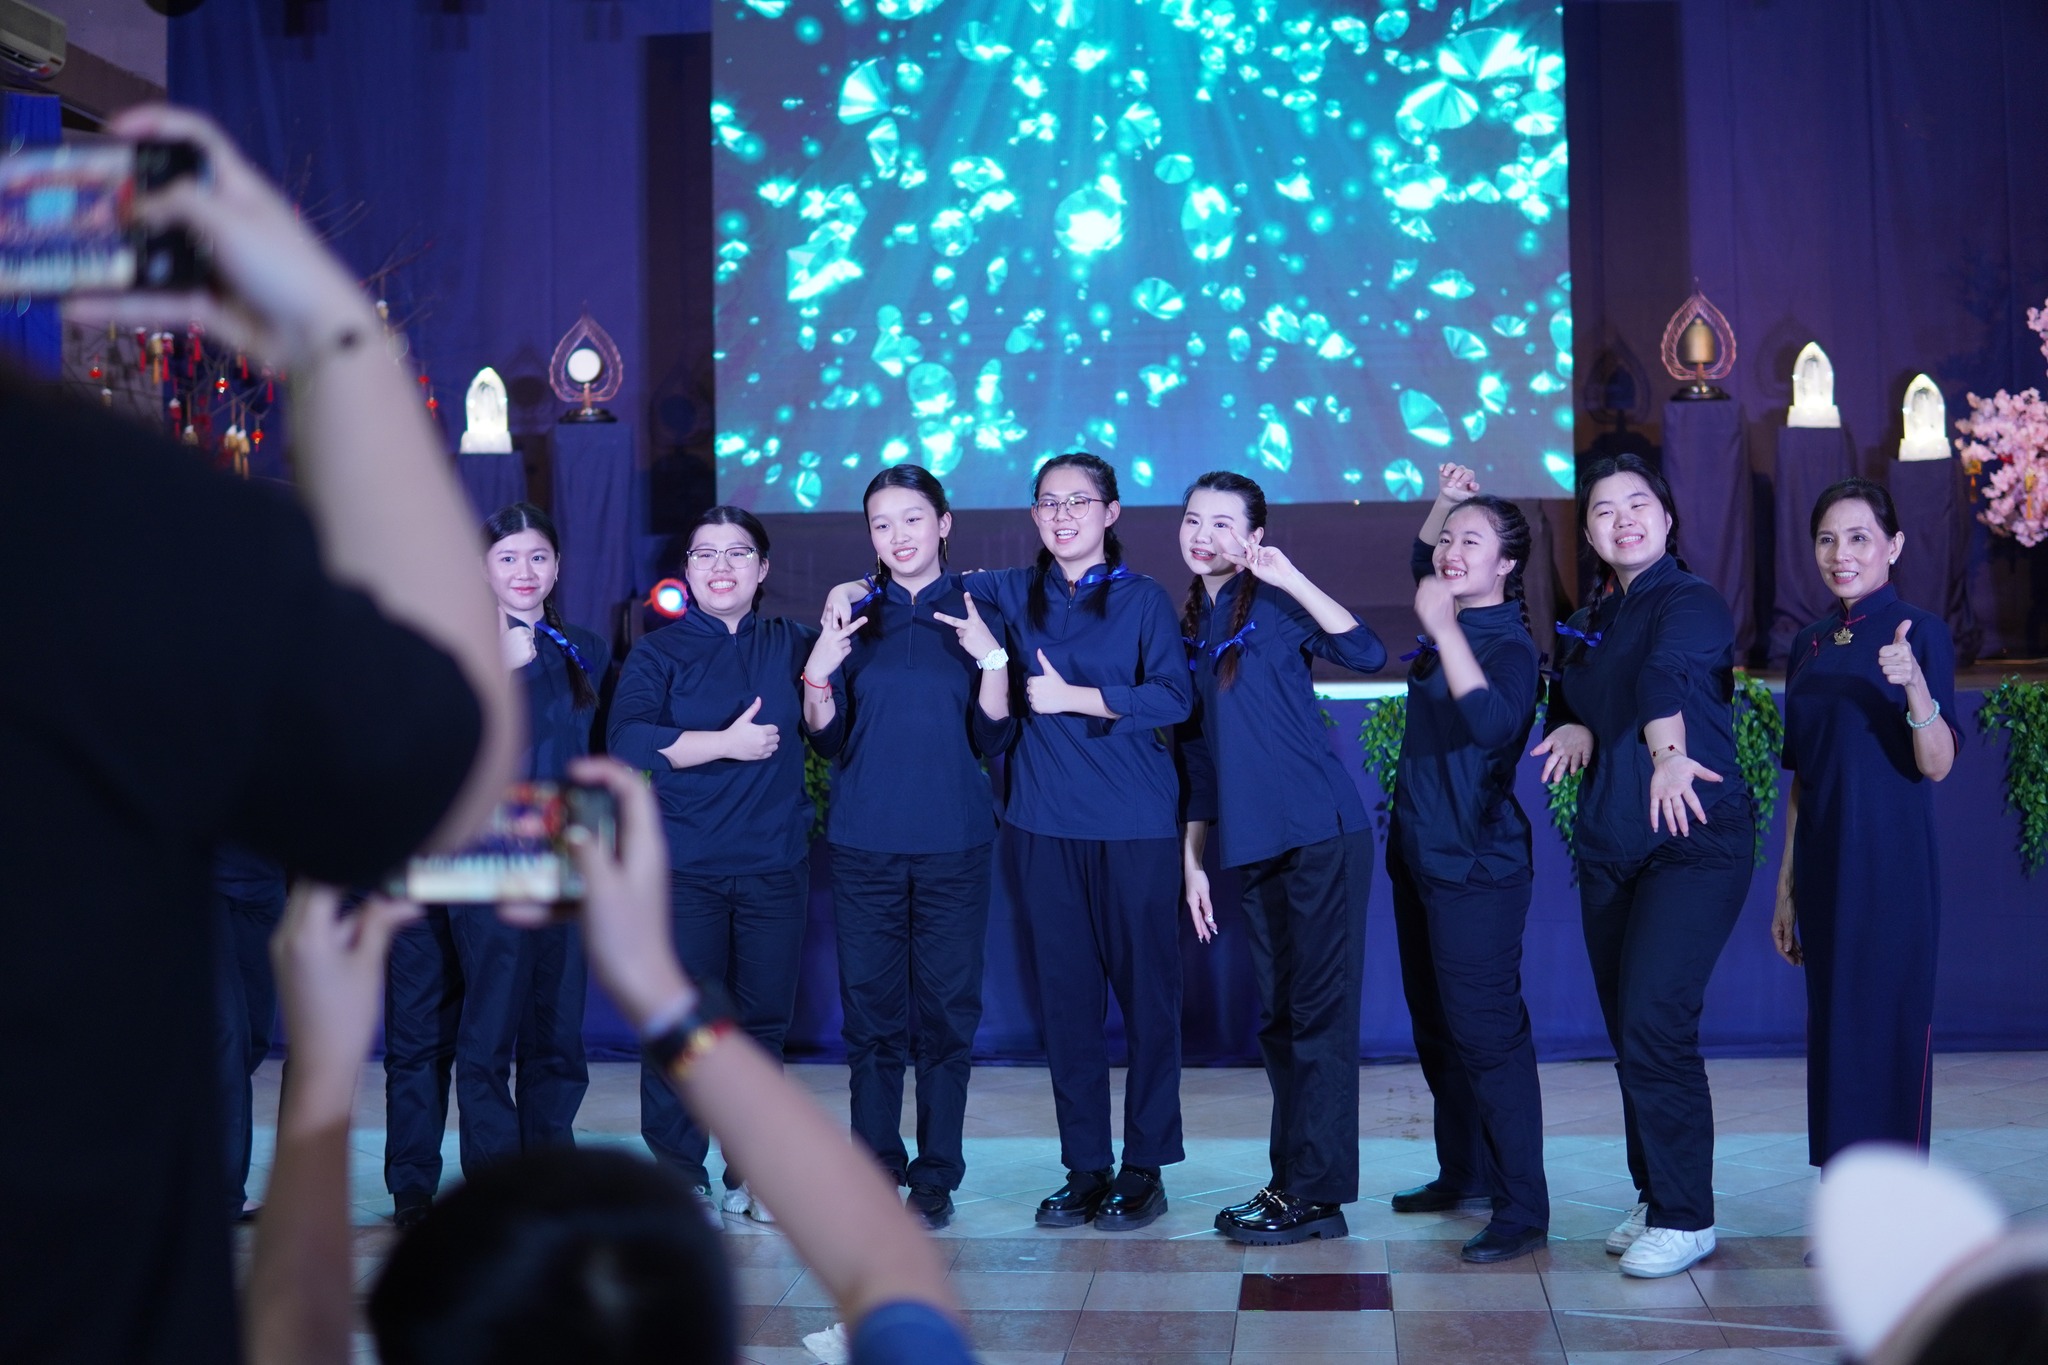 Tzu Chi Youths posed a groupie after a successful event.【Photo by Tzu Chi Davao】